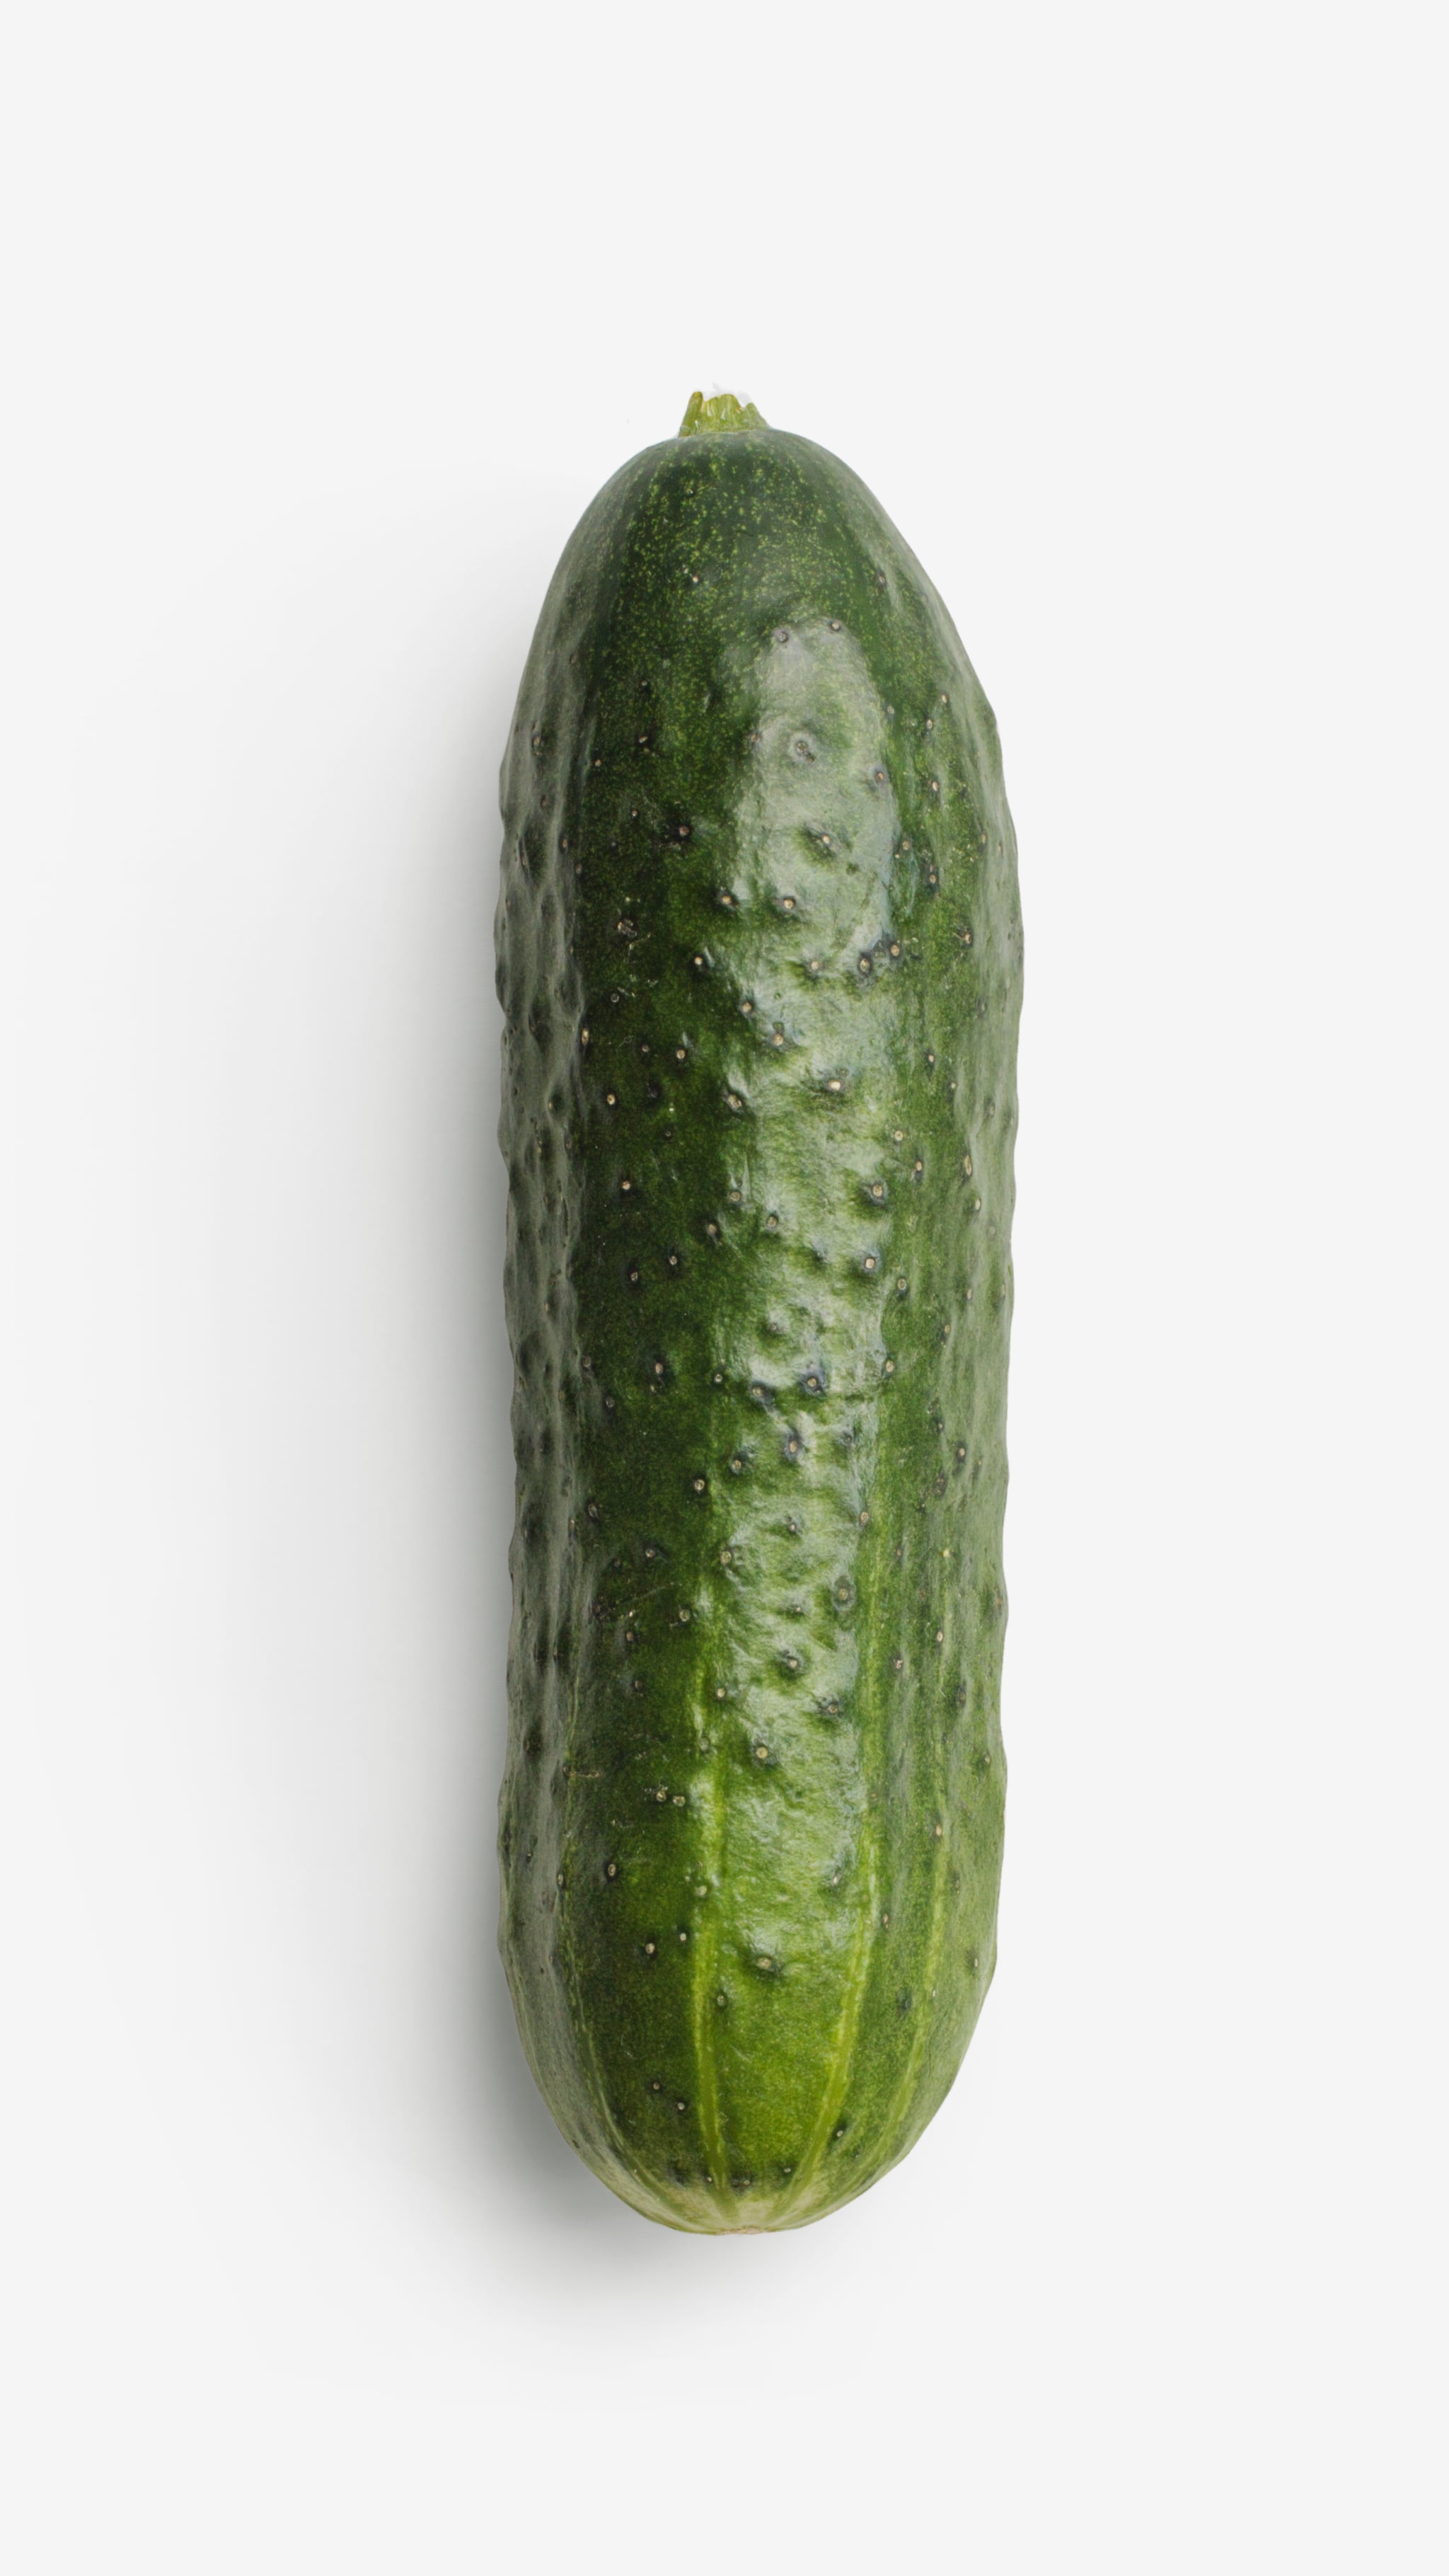 Cucumber PSD image with transparent background